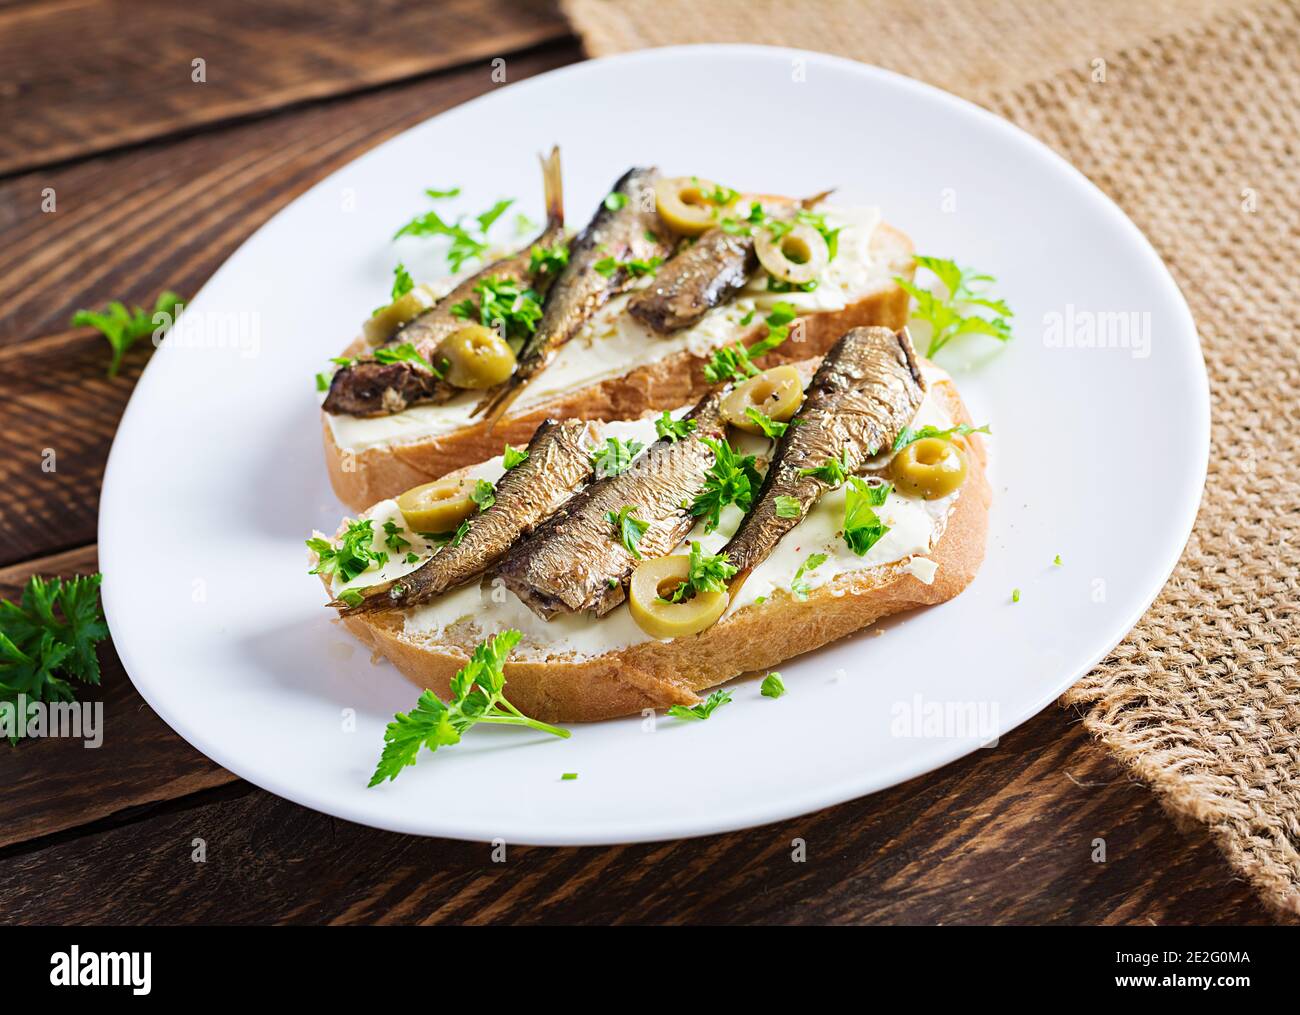 Sandwich - smorrebrod with sprats, green olives and butter on wooden table. Danish cuisine. Stock Photo